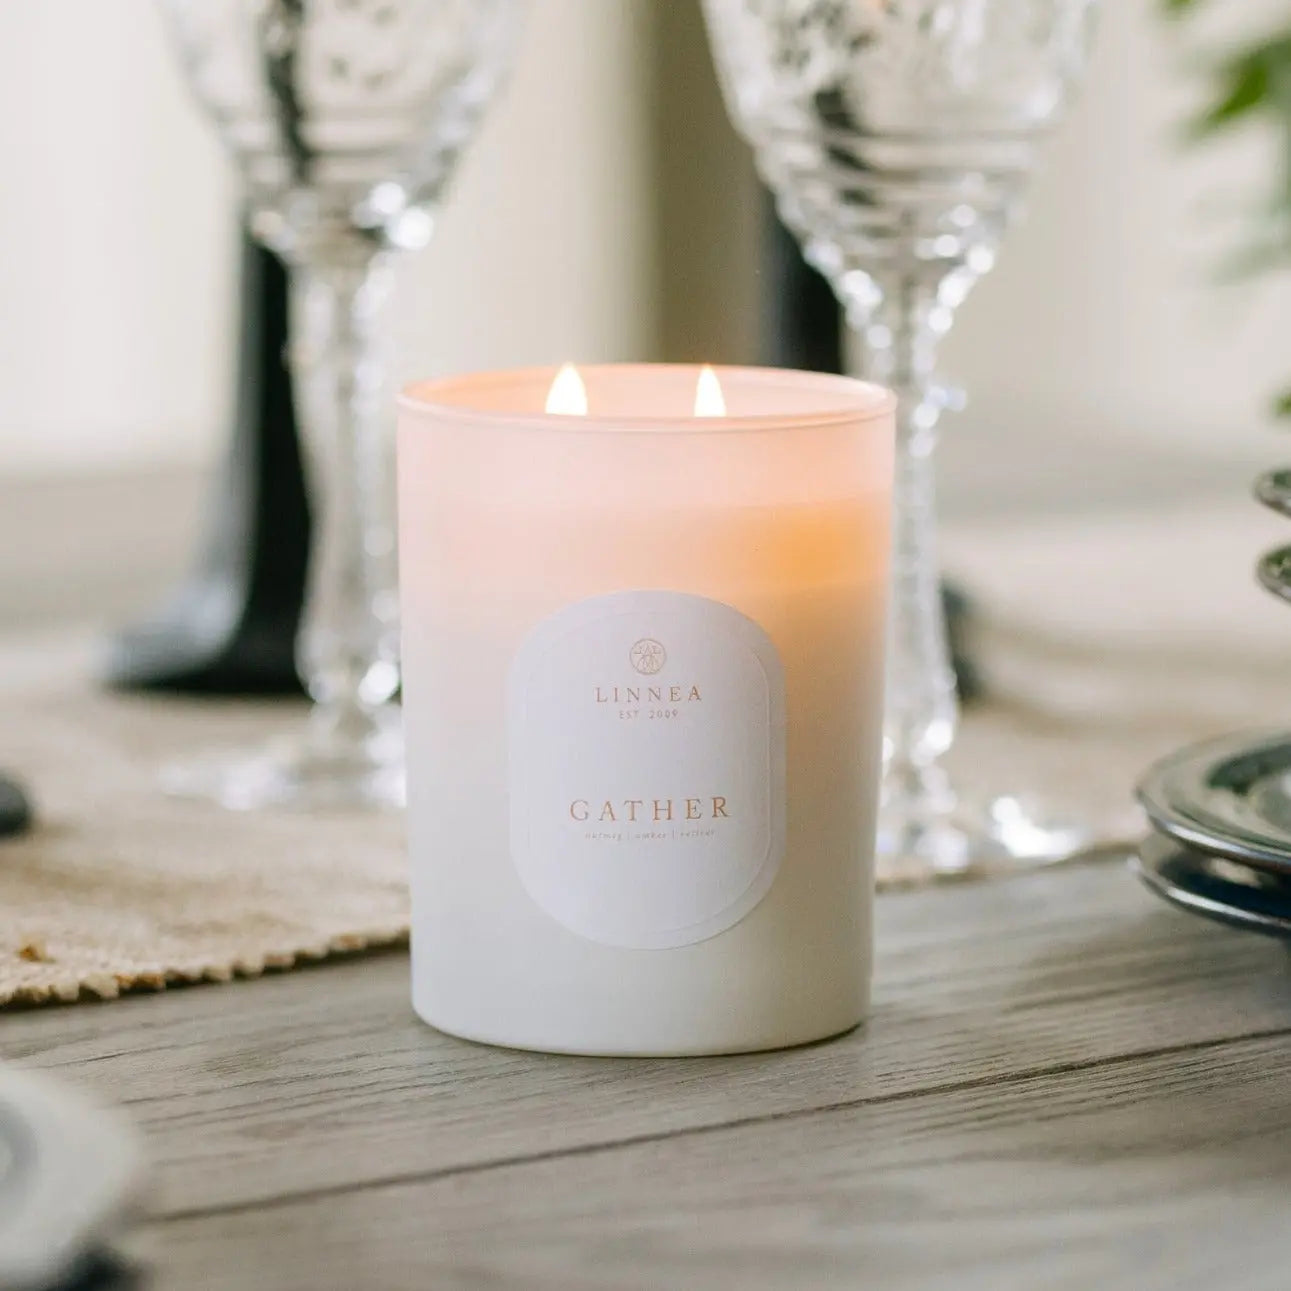 Linnea Gather Fall Scented Candle at Home Smith 